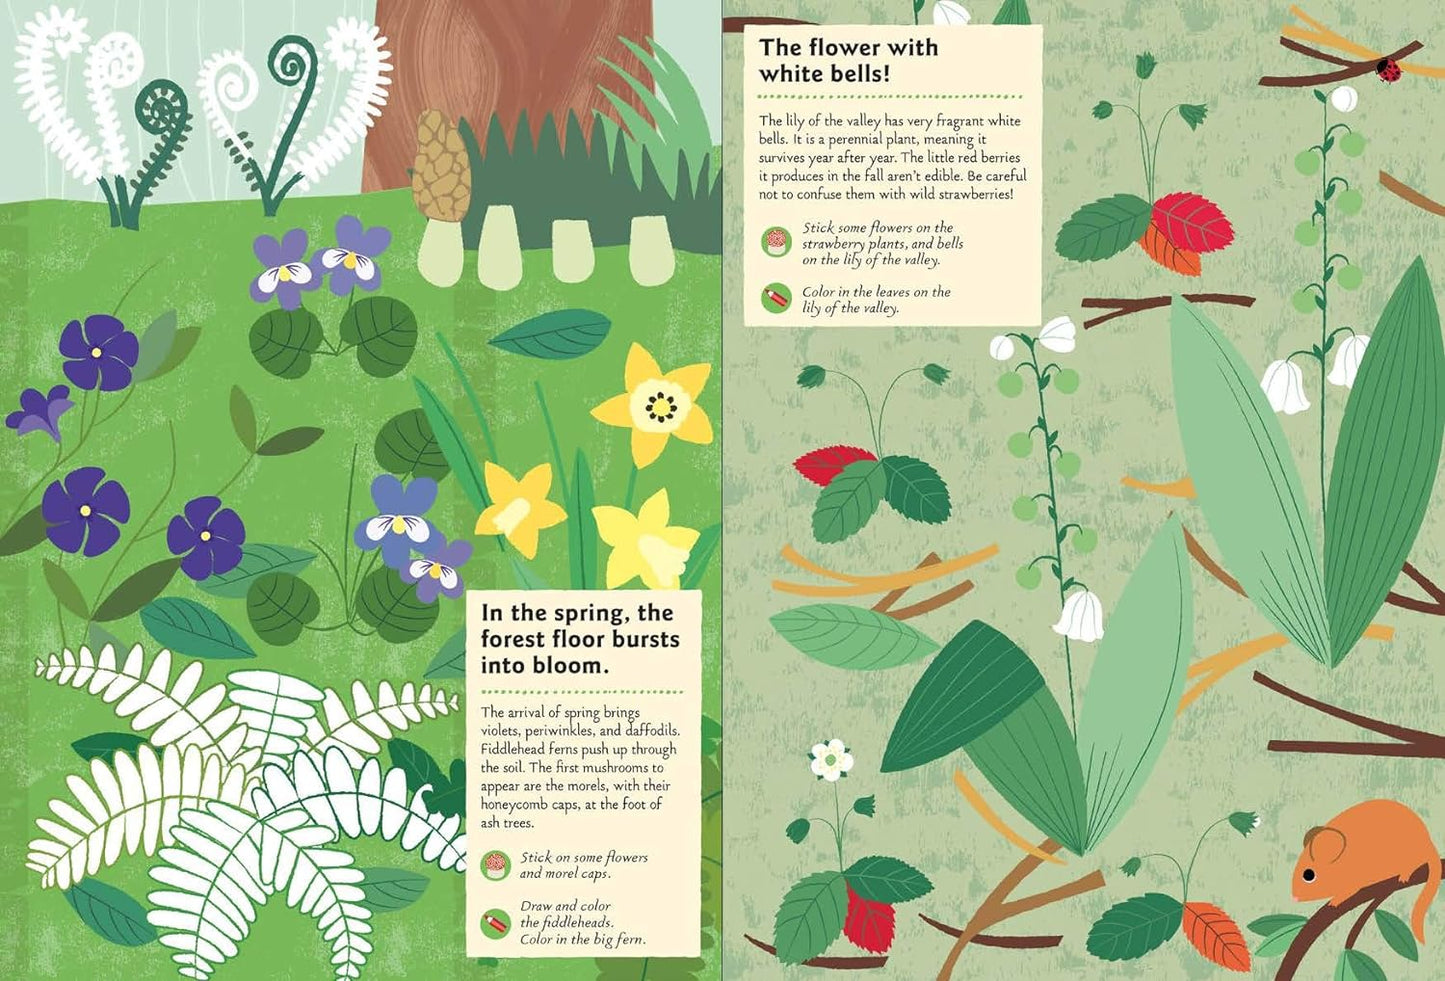 Keep young nature lovers entertained for hours with interactive activities and beautiful illustrations. Children are encouraged to color, sticker, draw, and learn.